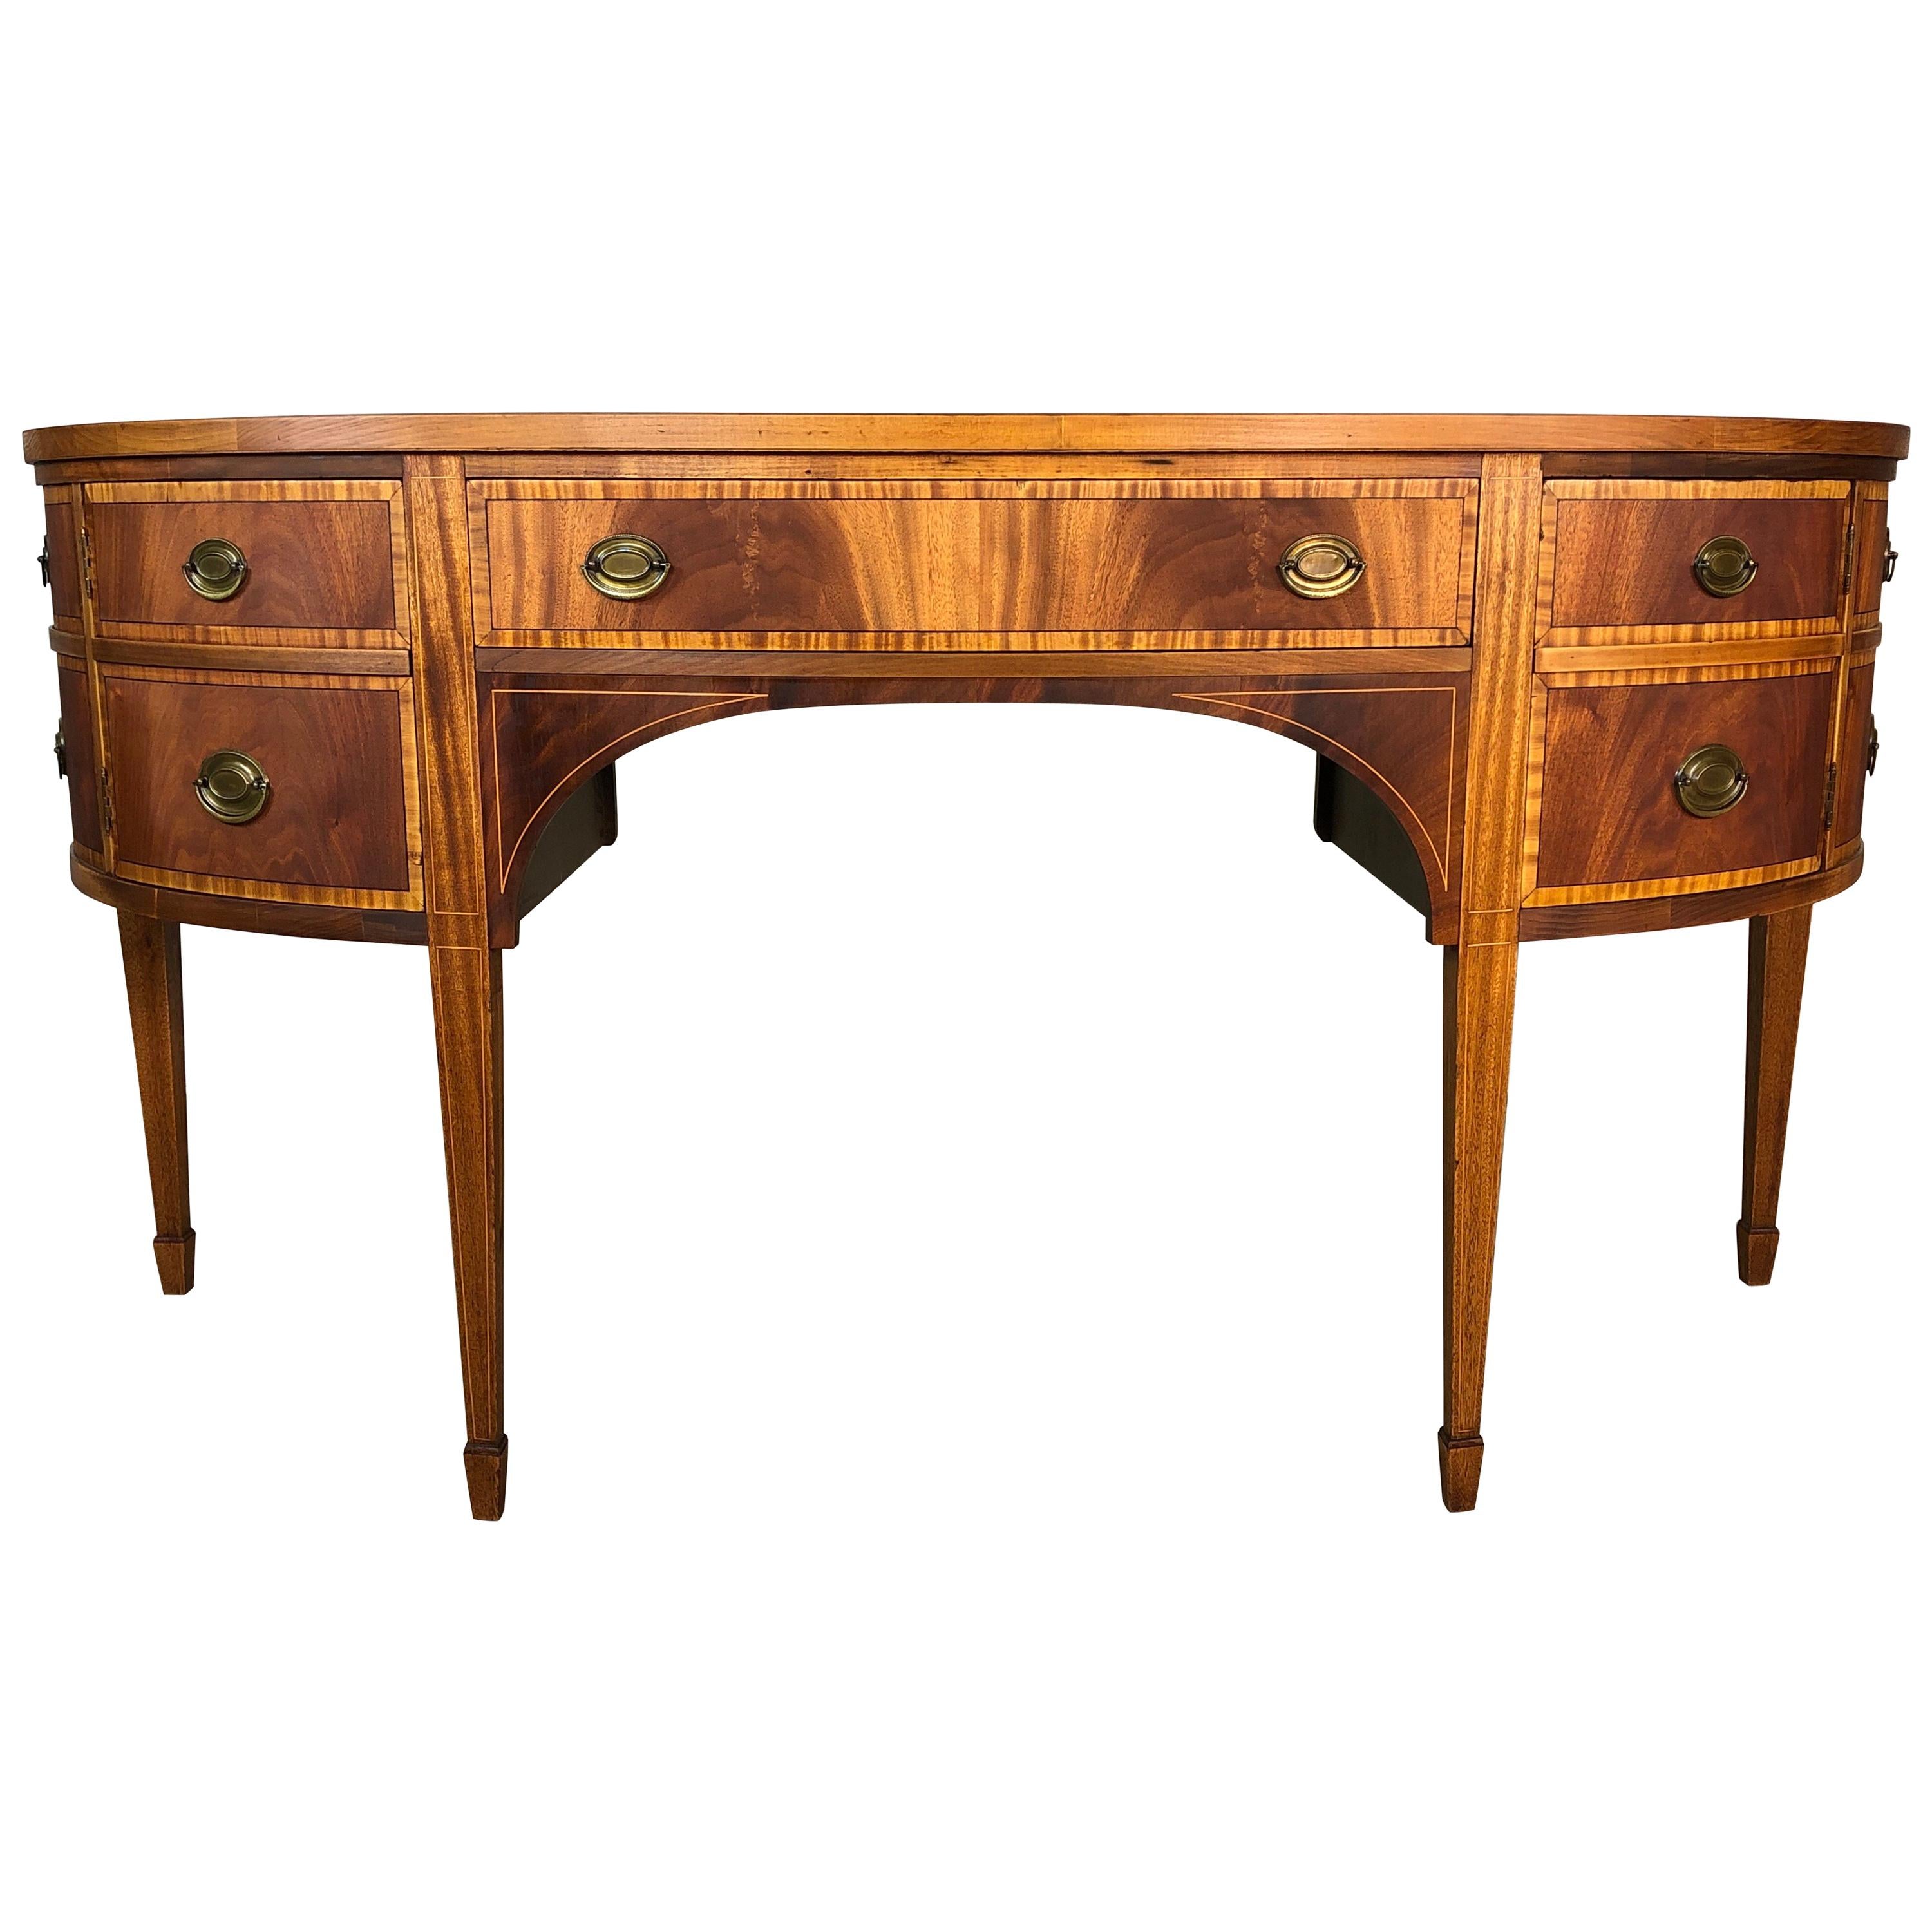 Antique Federal Style 20th Century Demilune Inlaid Mahogany Sideboard For Sale